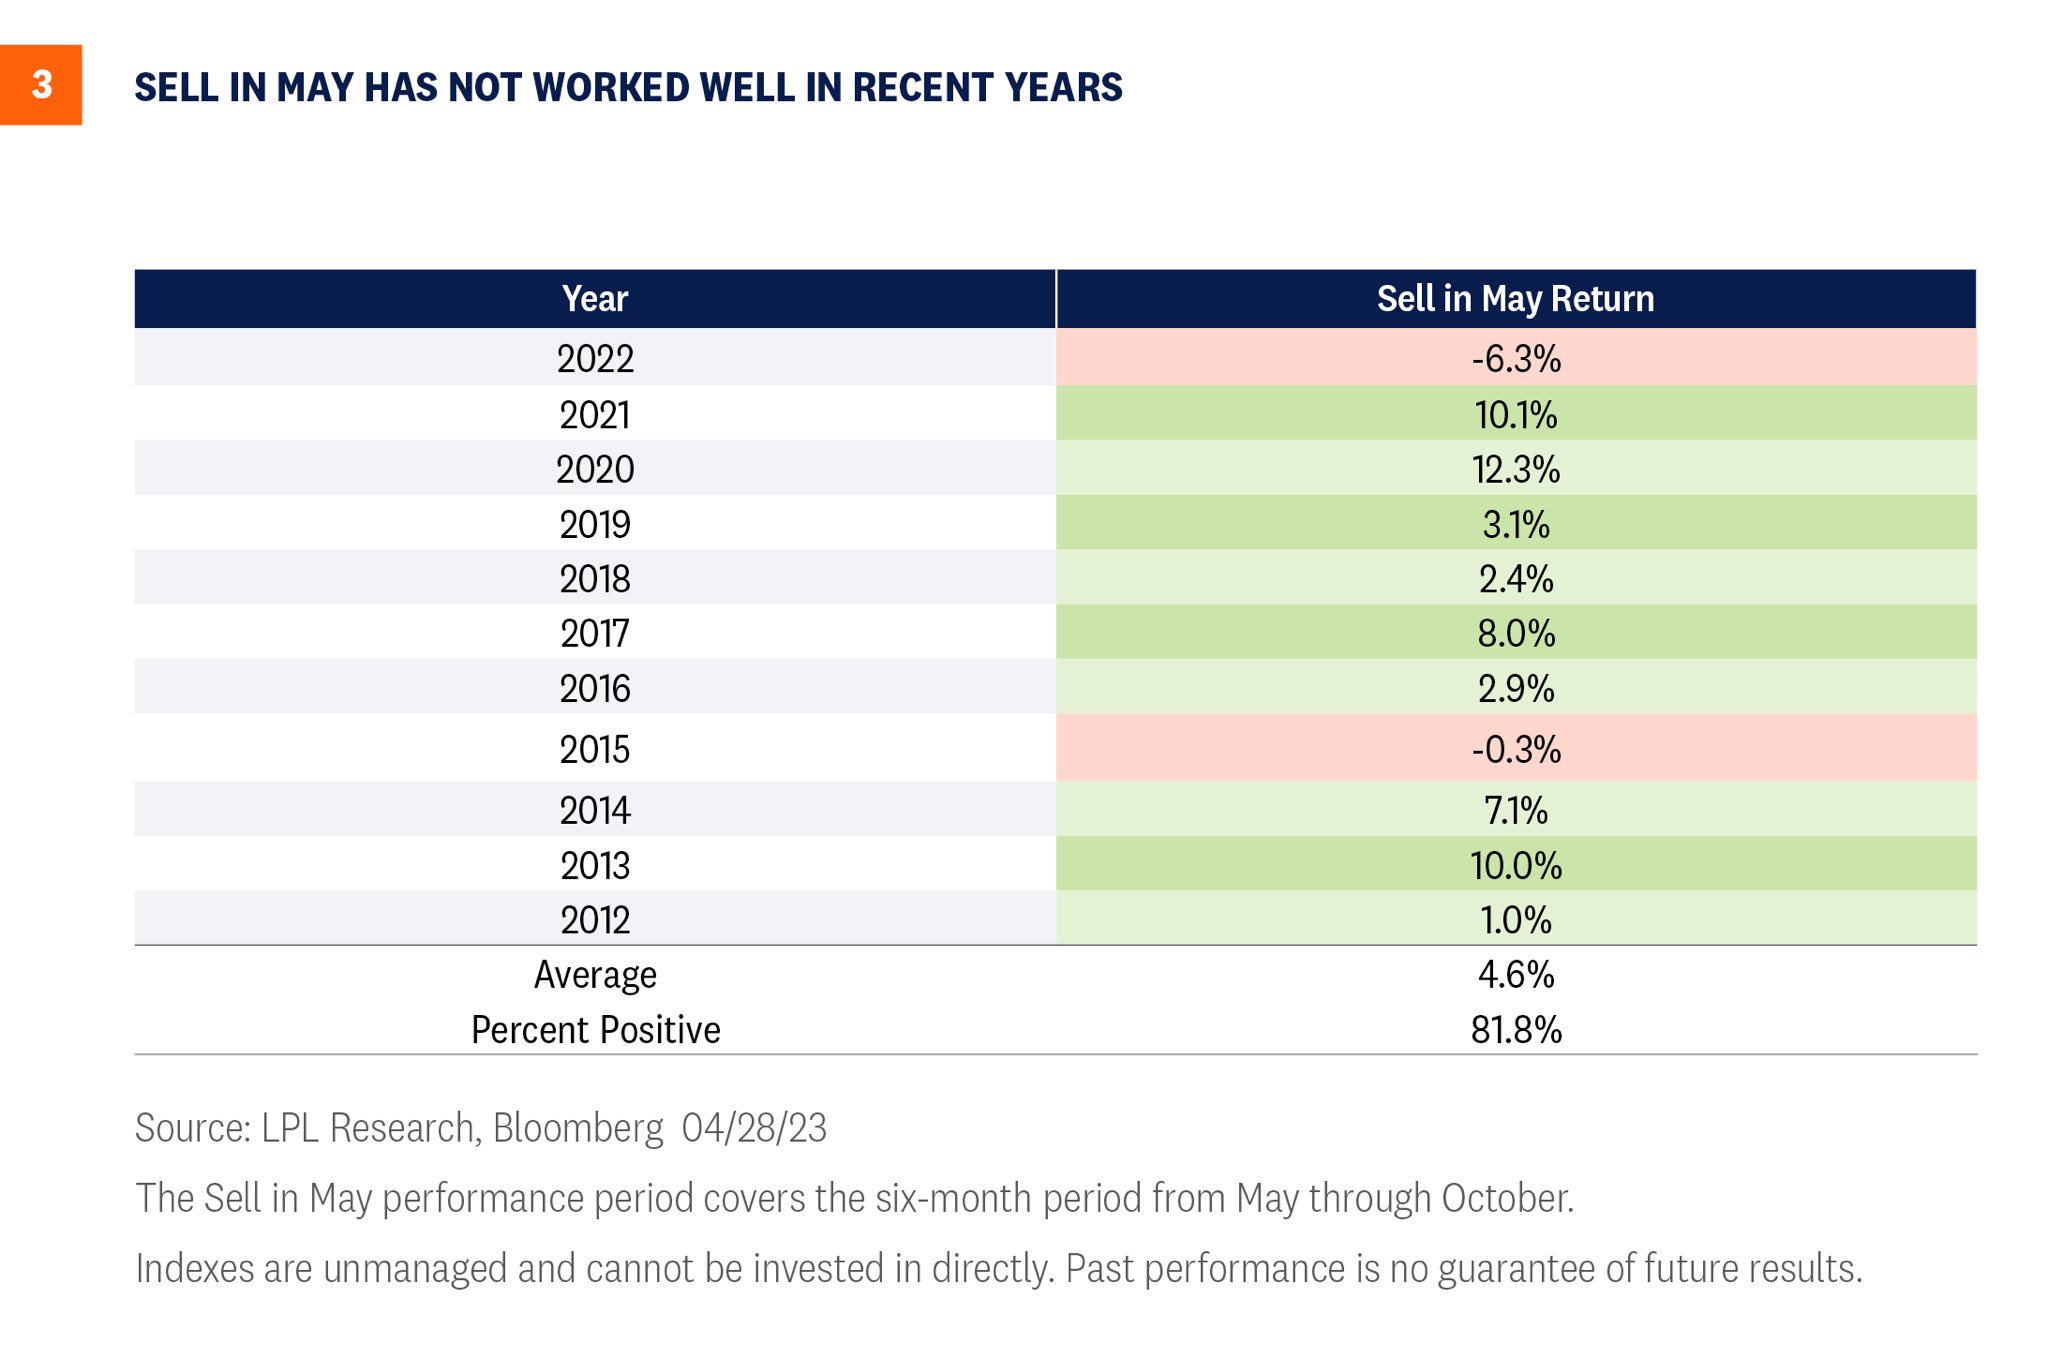 Ten year performance of sell in May